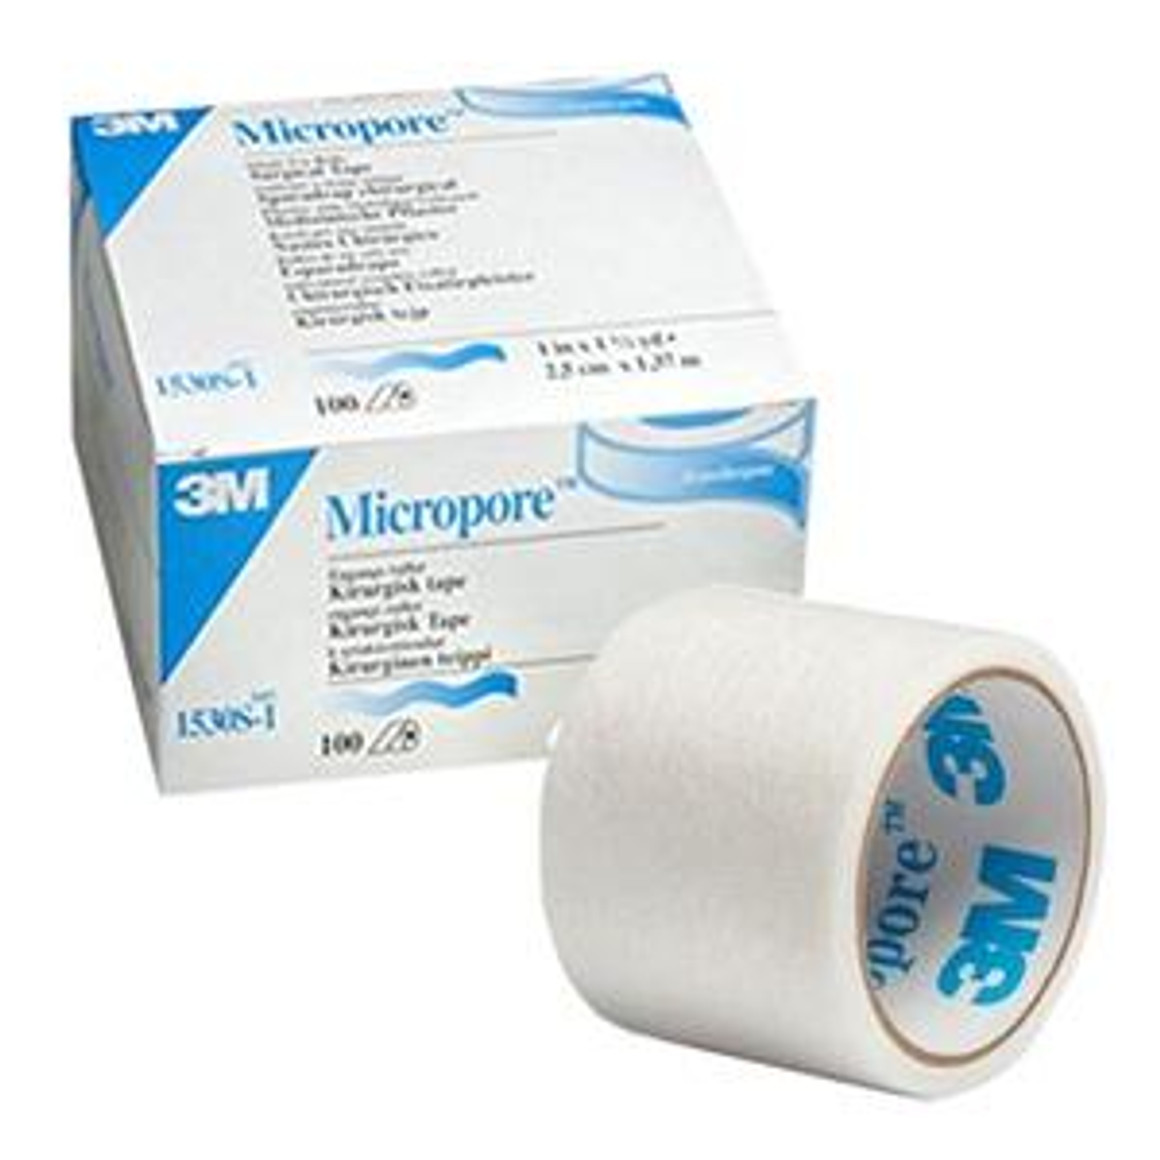 3M Micropore Medical Tape 1 Inch X 1-1/2 Yard - Box of 100 , Micropore Tape  1 Inch